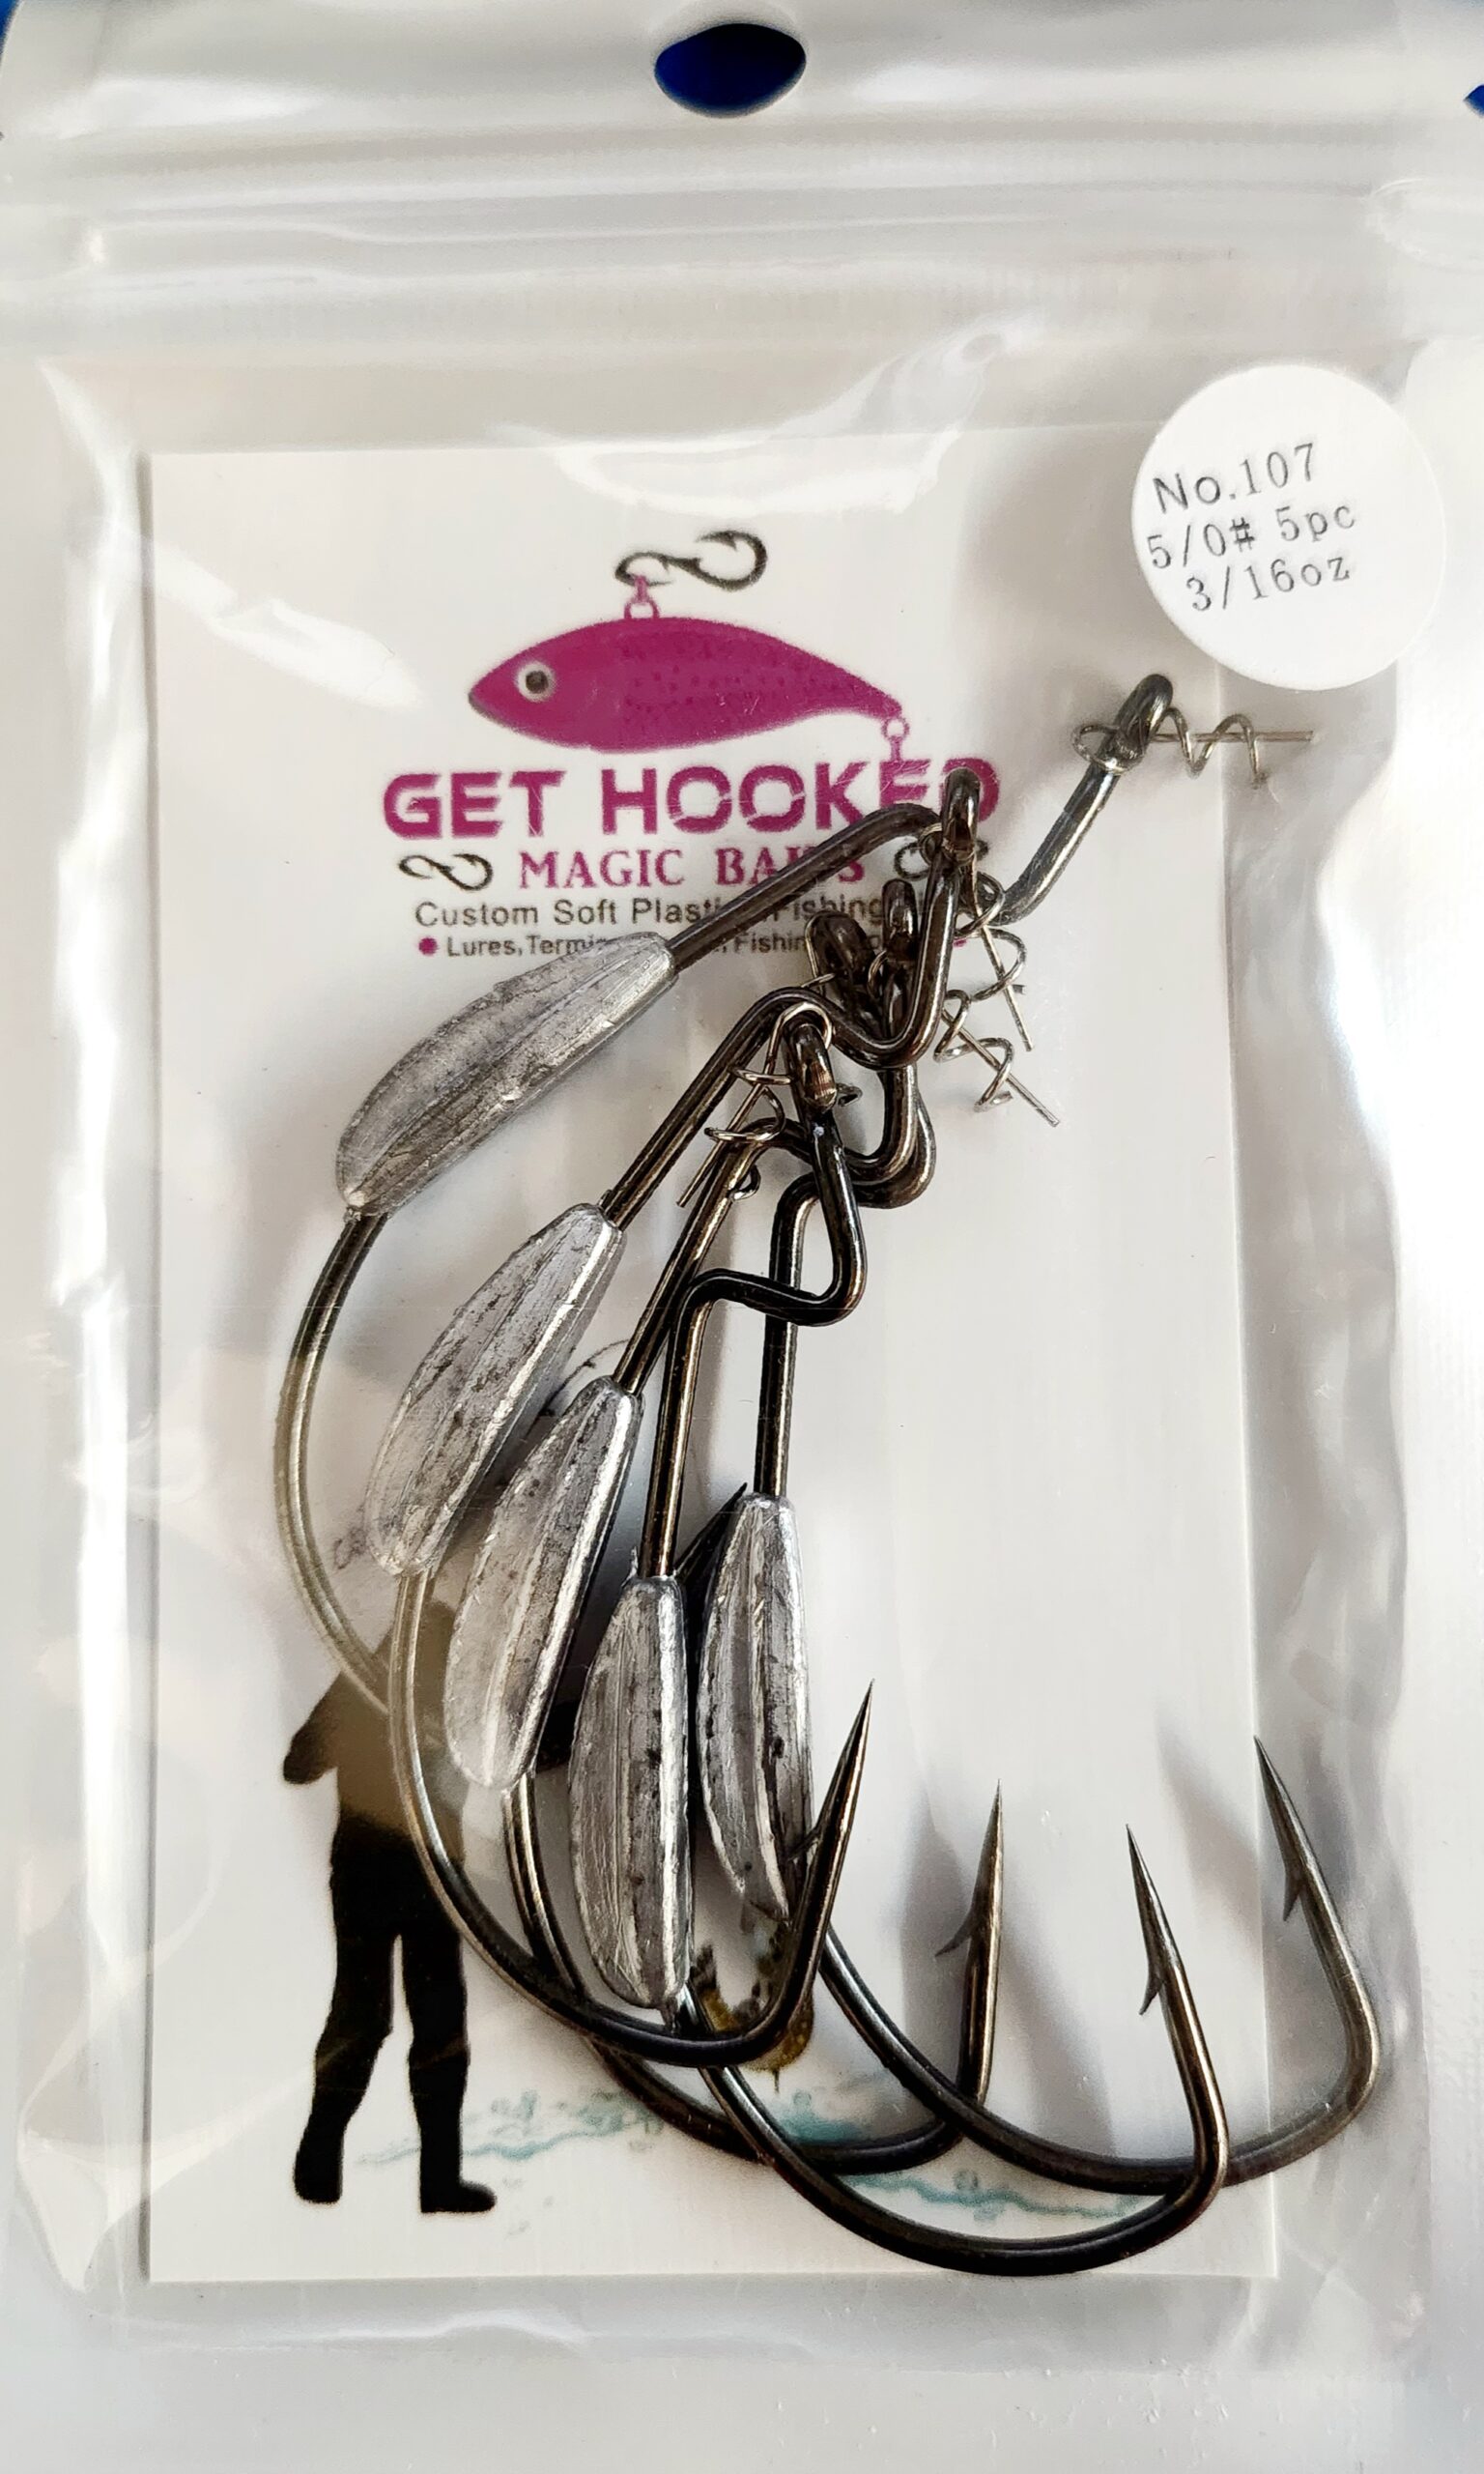 Flipping hooks in size 4/0 and 5/0 - Get Hooked Magic Baits